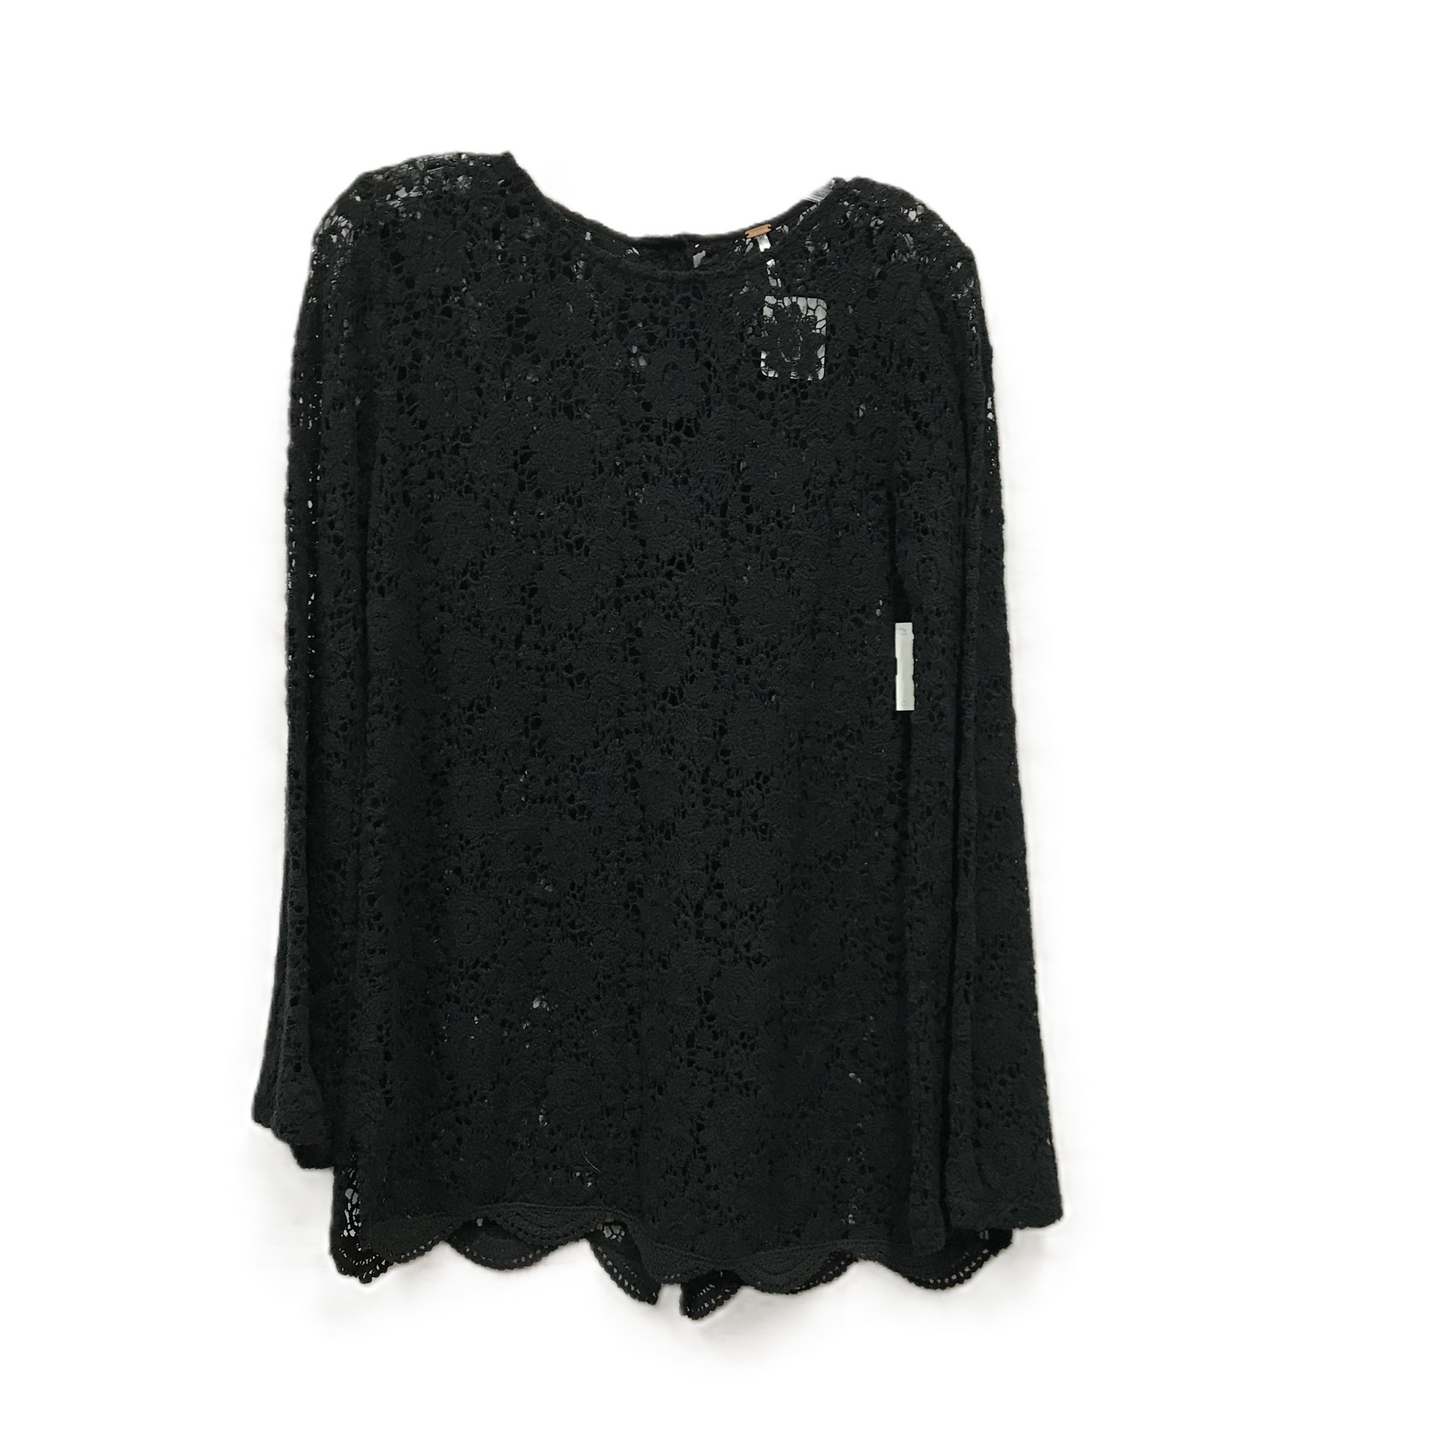 Black Top Long Sleeve By Free People, Size: S